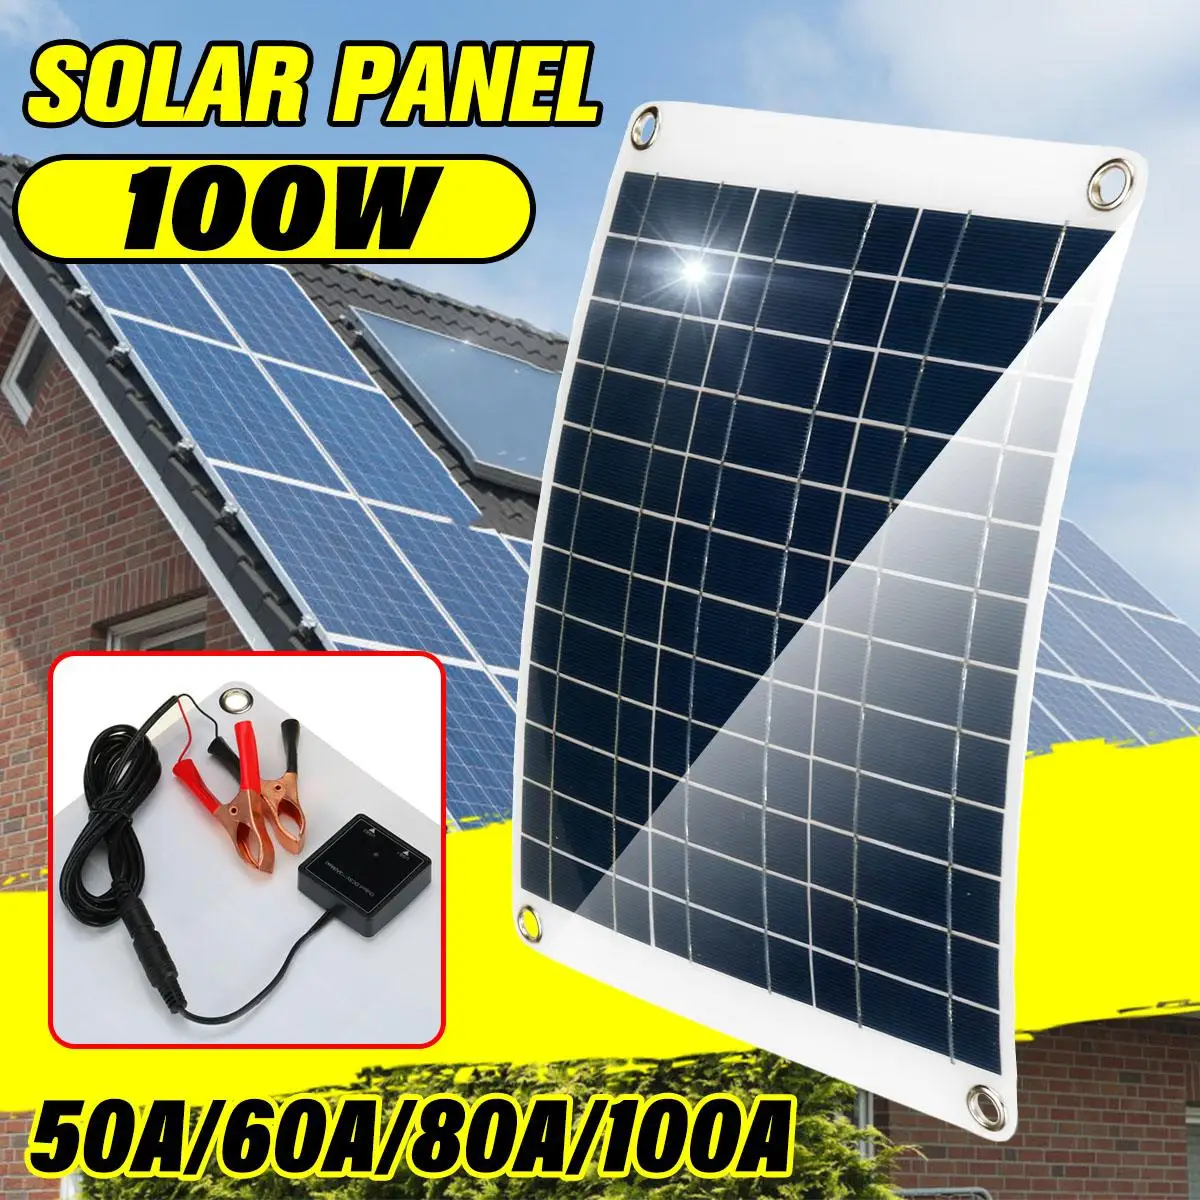 

100W Semi-Flexible Solar Panel Kit With 50A/60A/80A/100A Solar Controller Solar Cells for Car Yacht RV 12V/5V Battery Charger